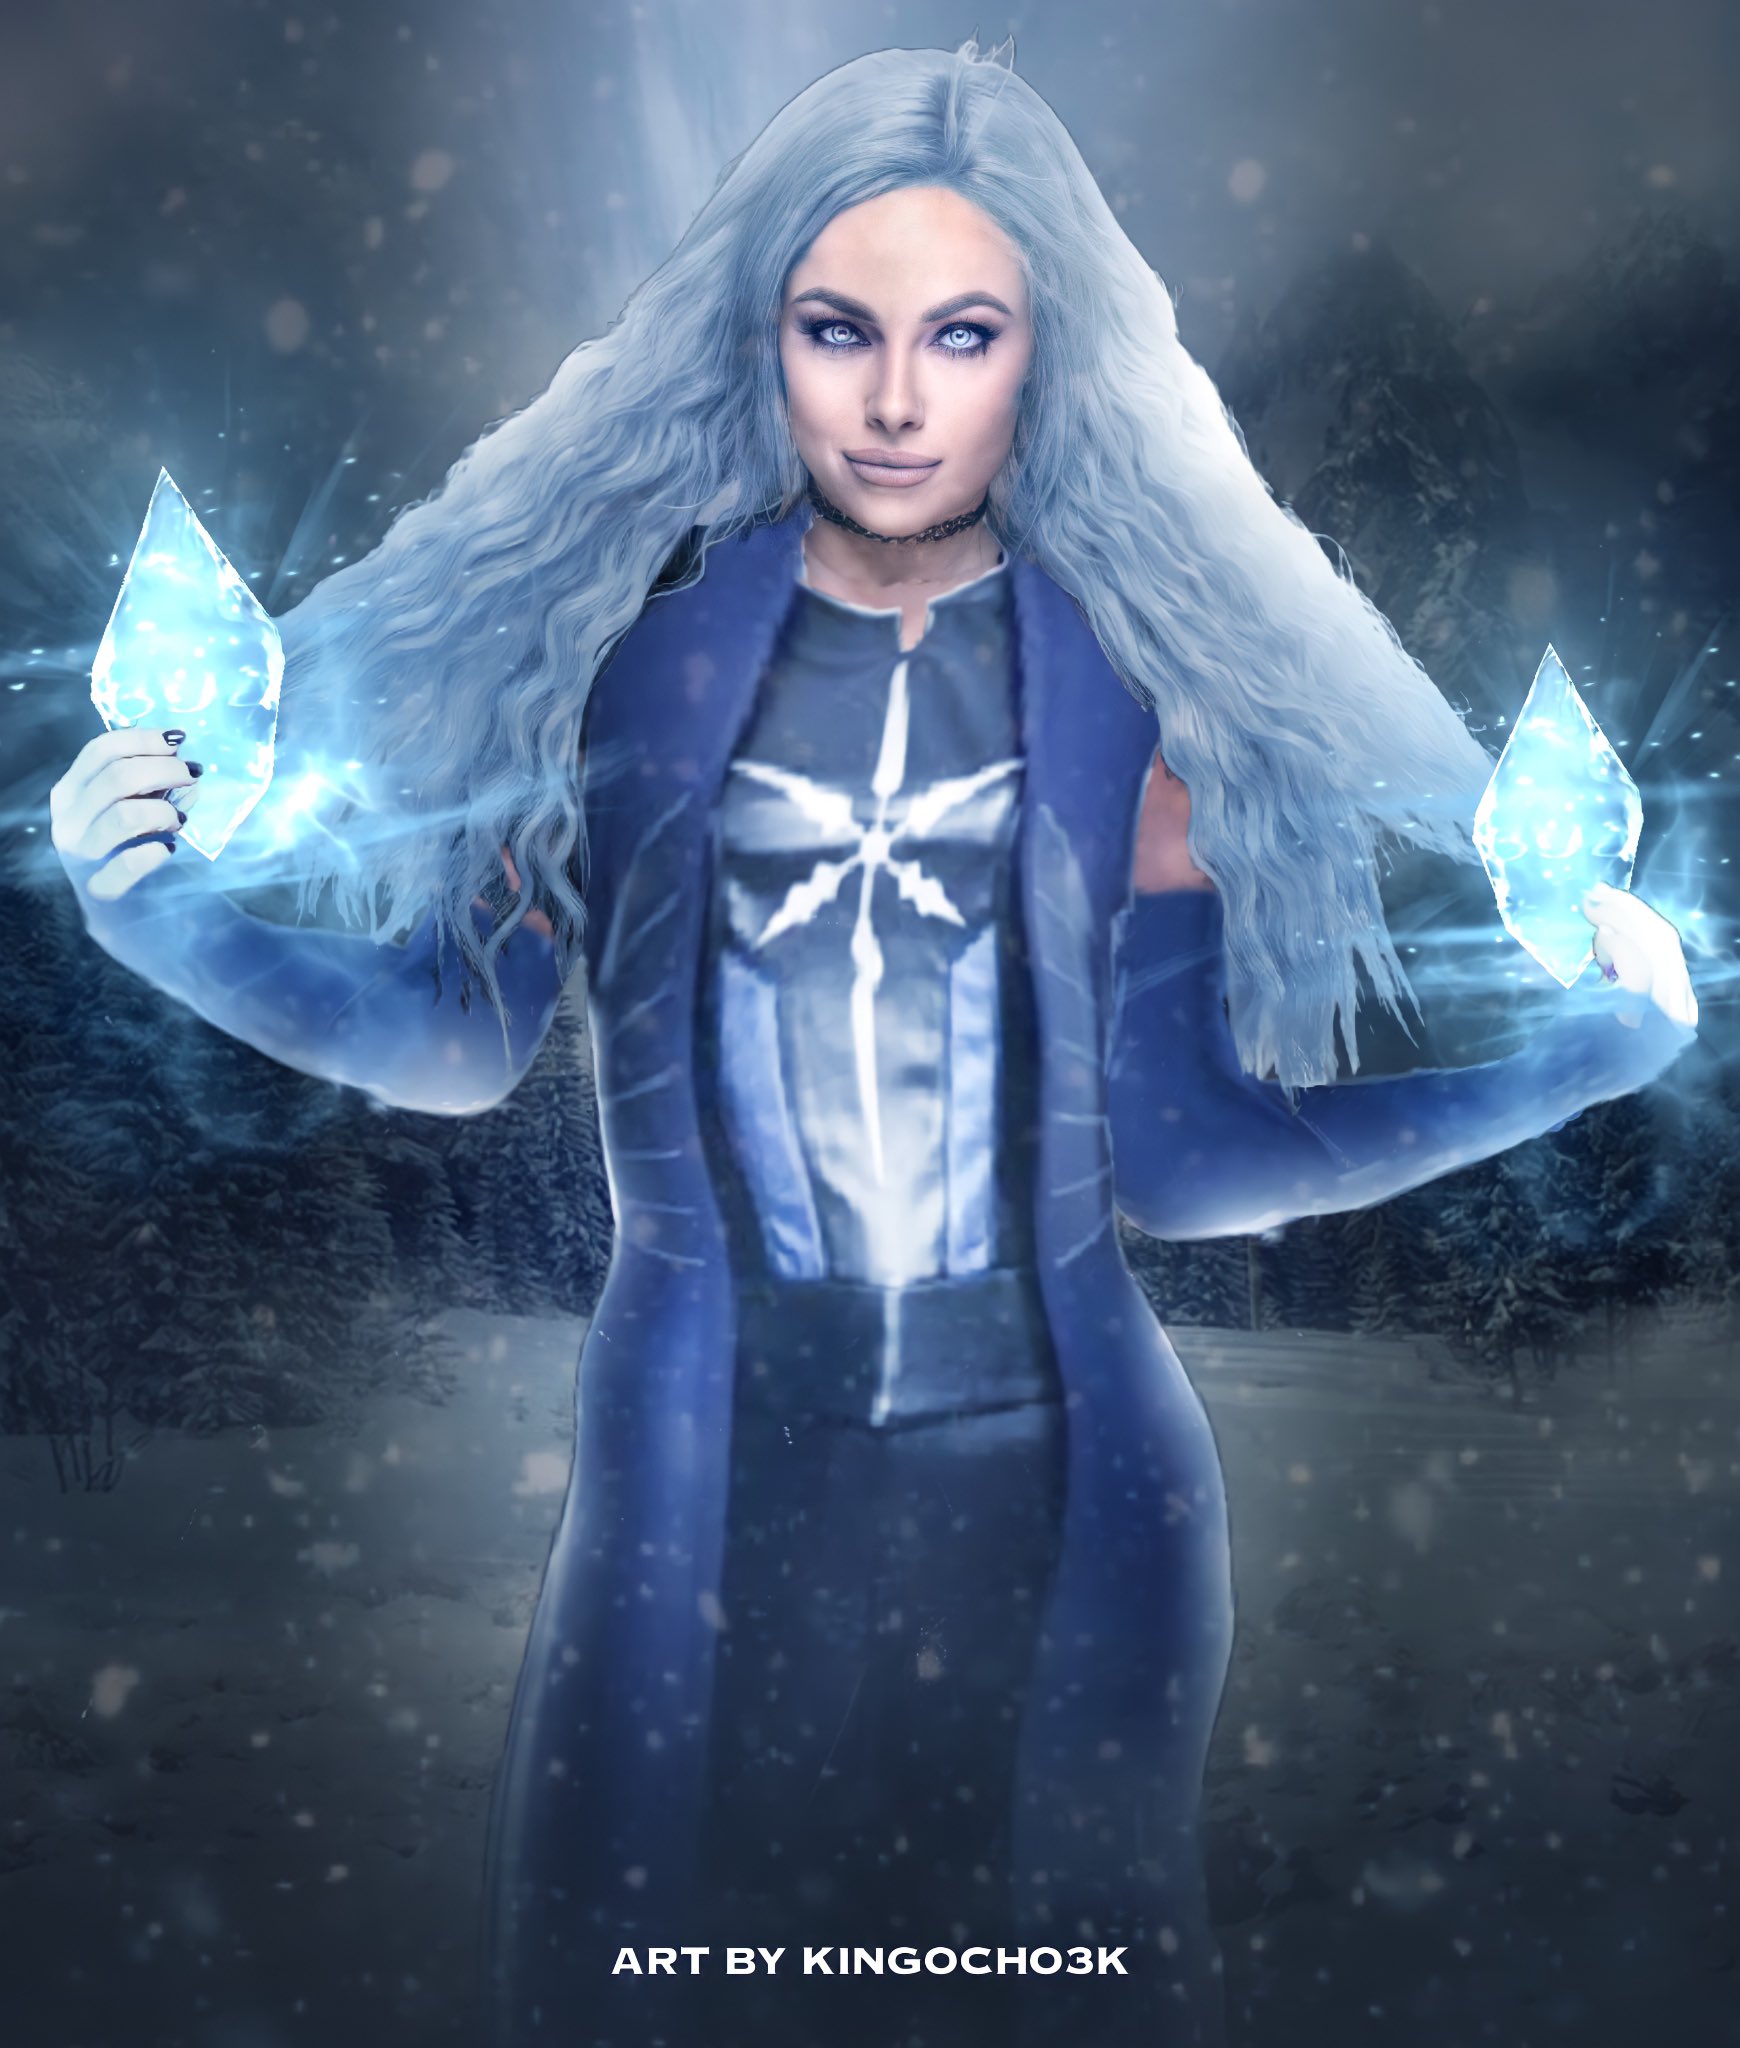 toilet pistol civilisere Christian Heard on Twitter: "Here's my latest edit I made of  @YaOnlyLivvOnce as Killer Frost from DC Universe. I hope you guys like  it.#WWE #fanart https://t.co/CQUnwVCqjD" / Twitter